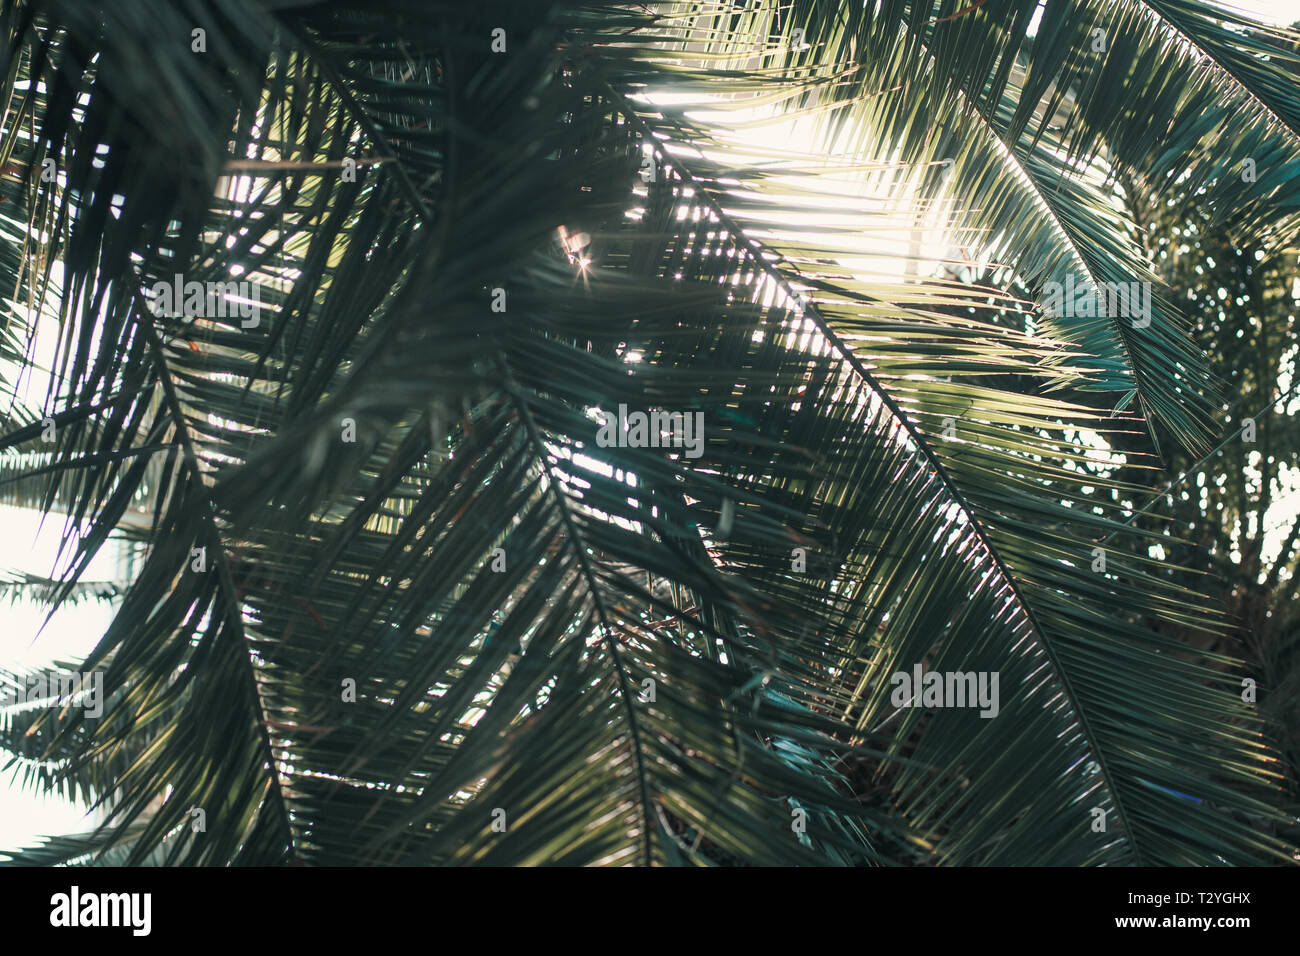 Closeup of palm tree leaves backlighted by sunglight Stock Photo